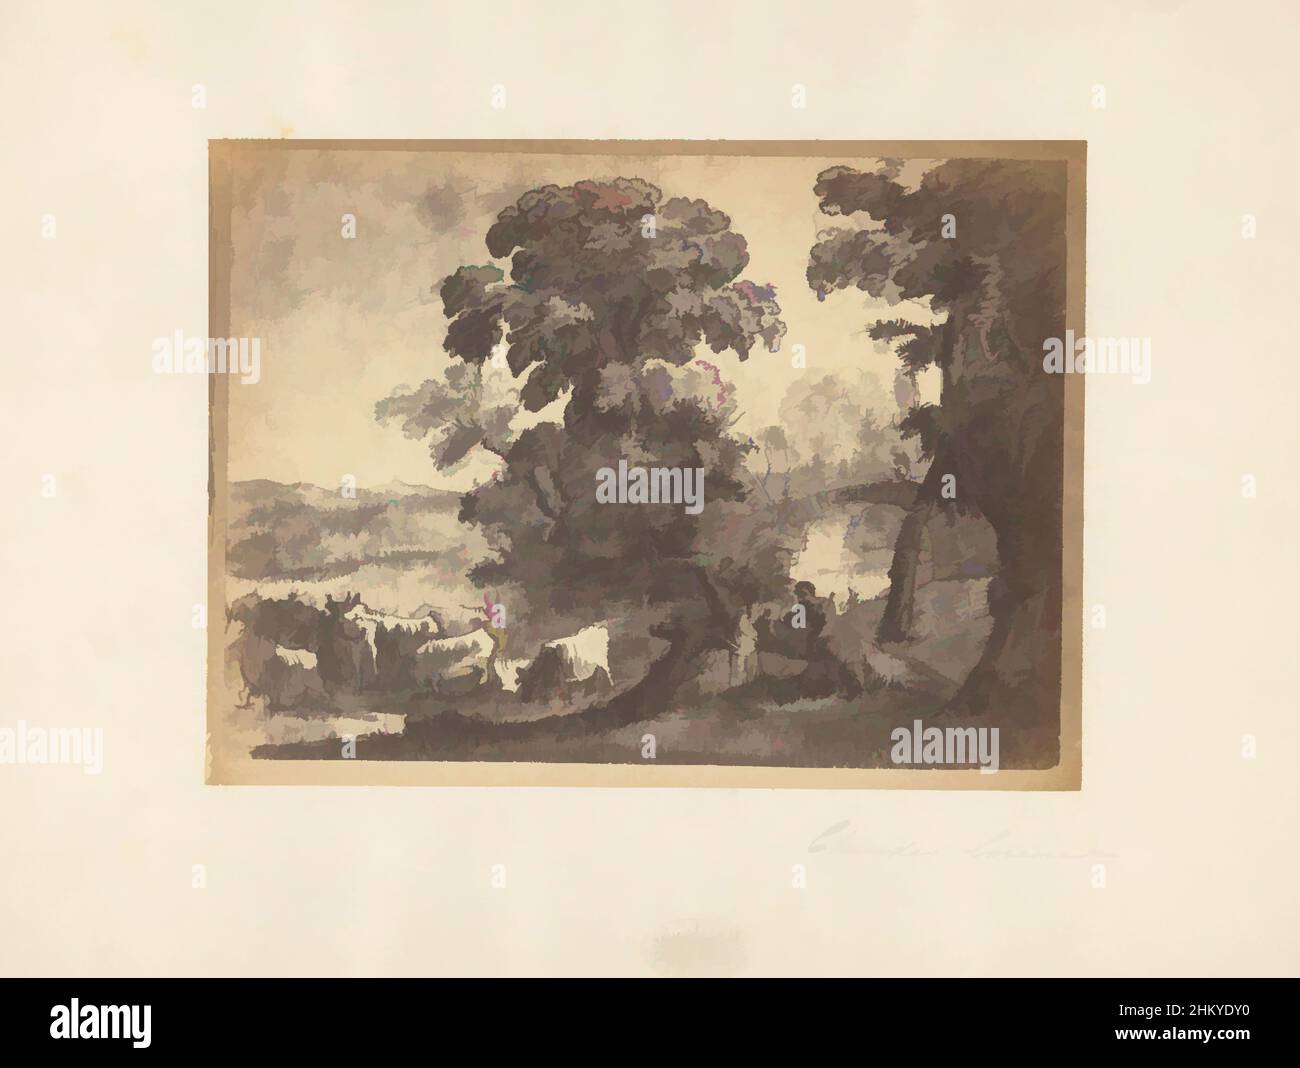 Art inspired by Photoreproduction of a drawing by Claude Lorrain, Giovanni Brampton Philpot, intermediary draughtsman: Claude Lorrain, Florence, 1851 - 1878, paper, cardboard, albumen print, height 147 mm × width 199 mmheight 241 mm × width 319 mm, Classic works modernized by Artotop with a splash of modernity. Shapes, color and value, eye-catching visual impact on art. Emotions through freedom of artworks in a contemporary way. A timeless message pursuing a wildly creative new direction. Artists turning to the digital medium and creating the Artotop NFT Stock Photo